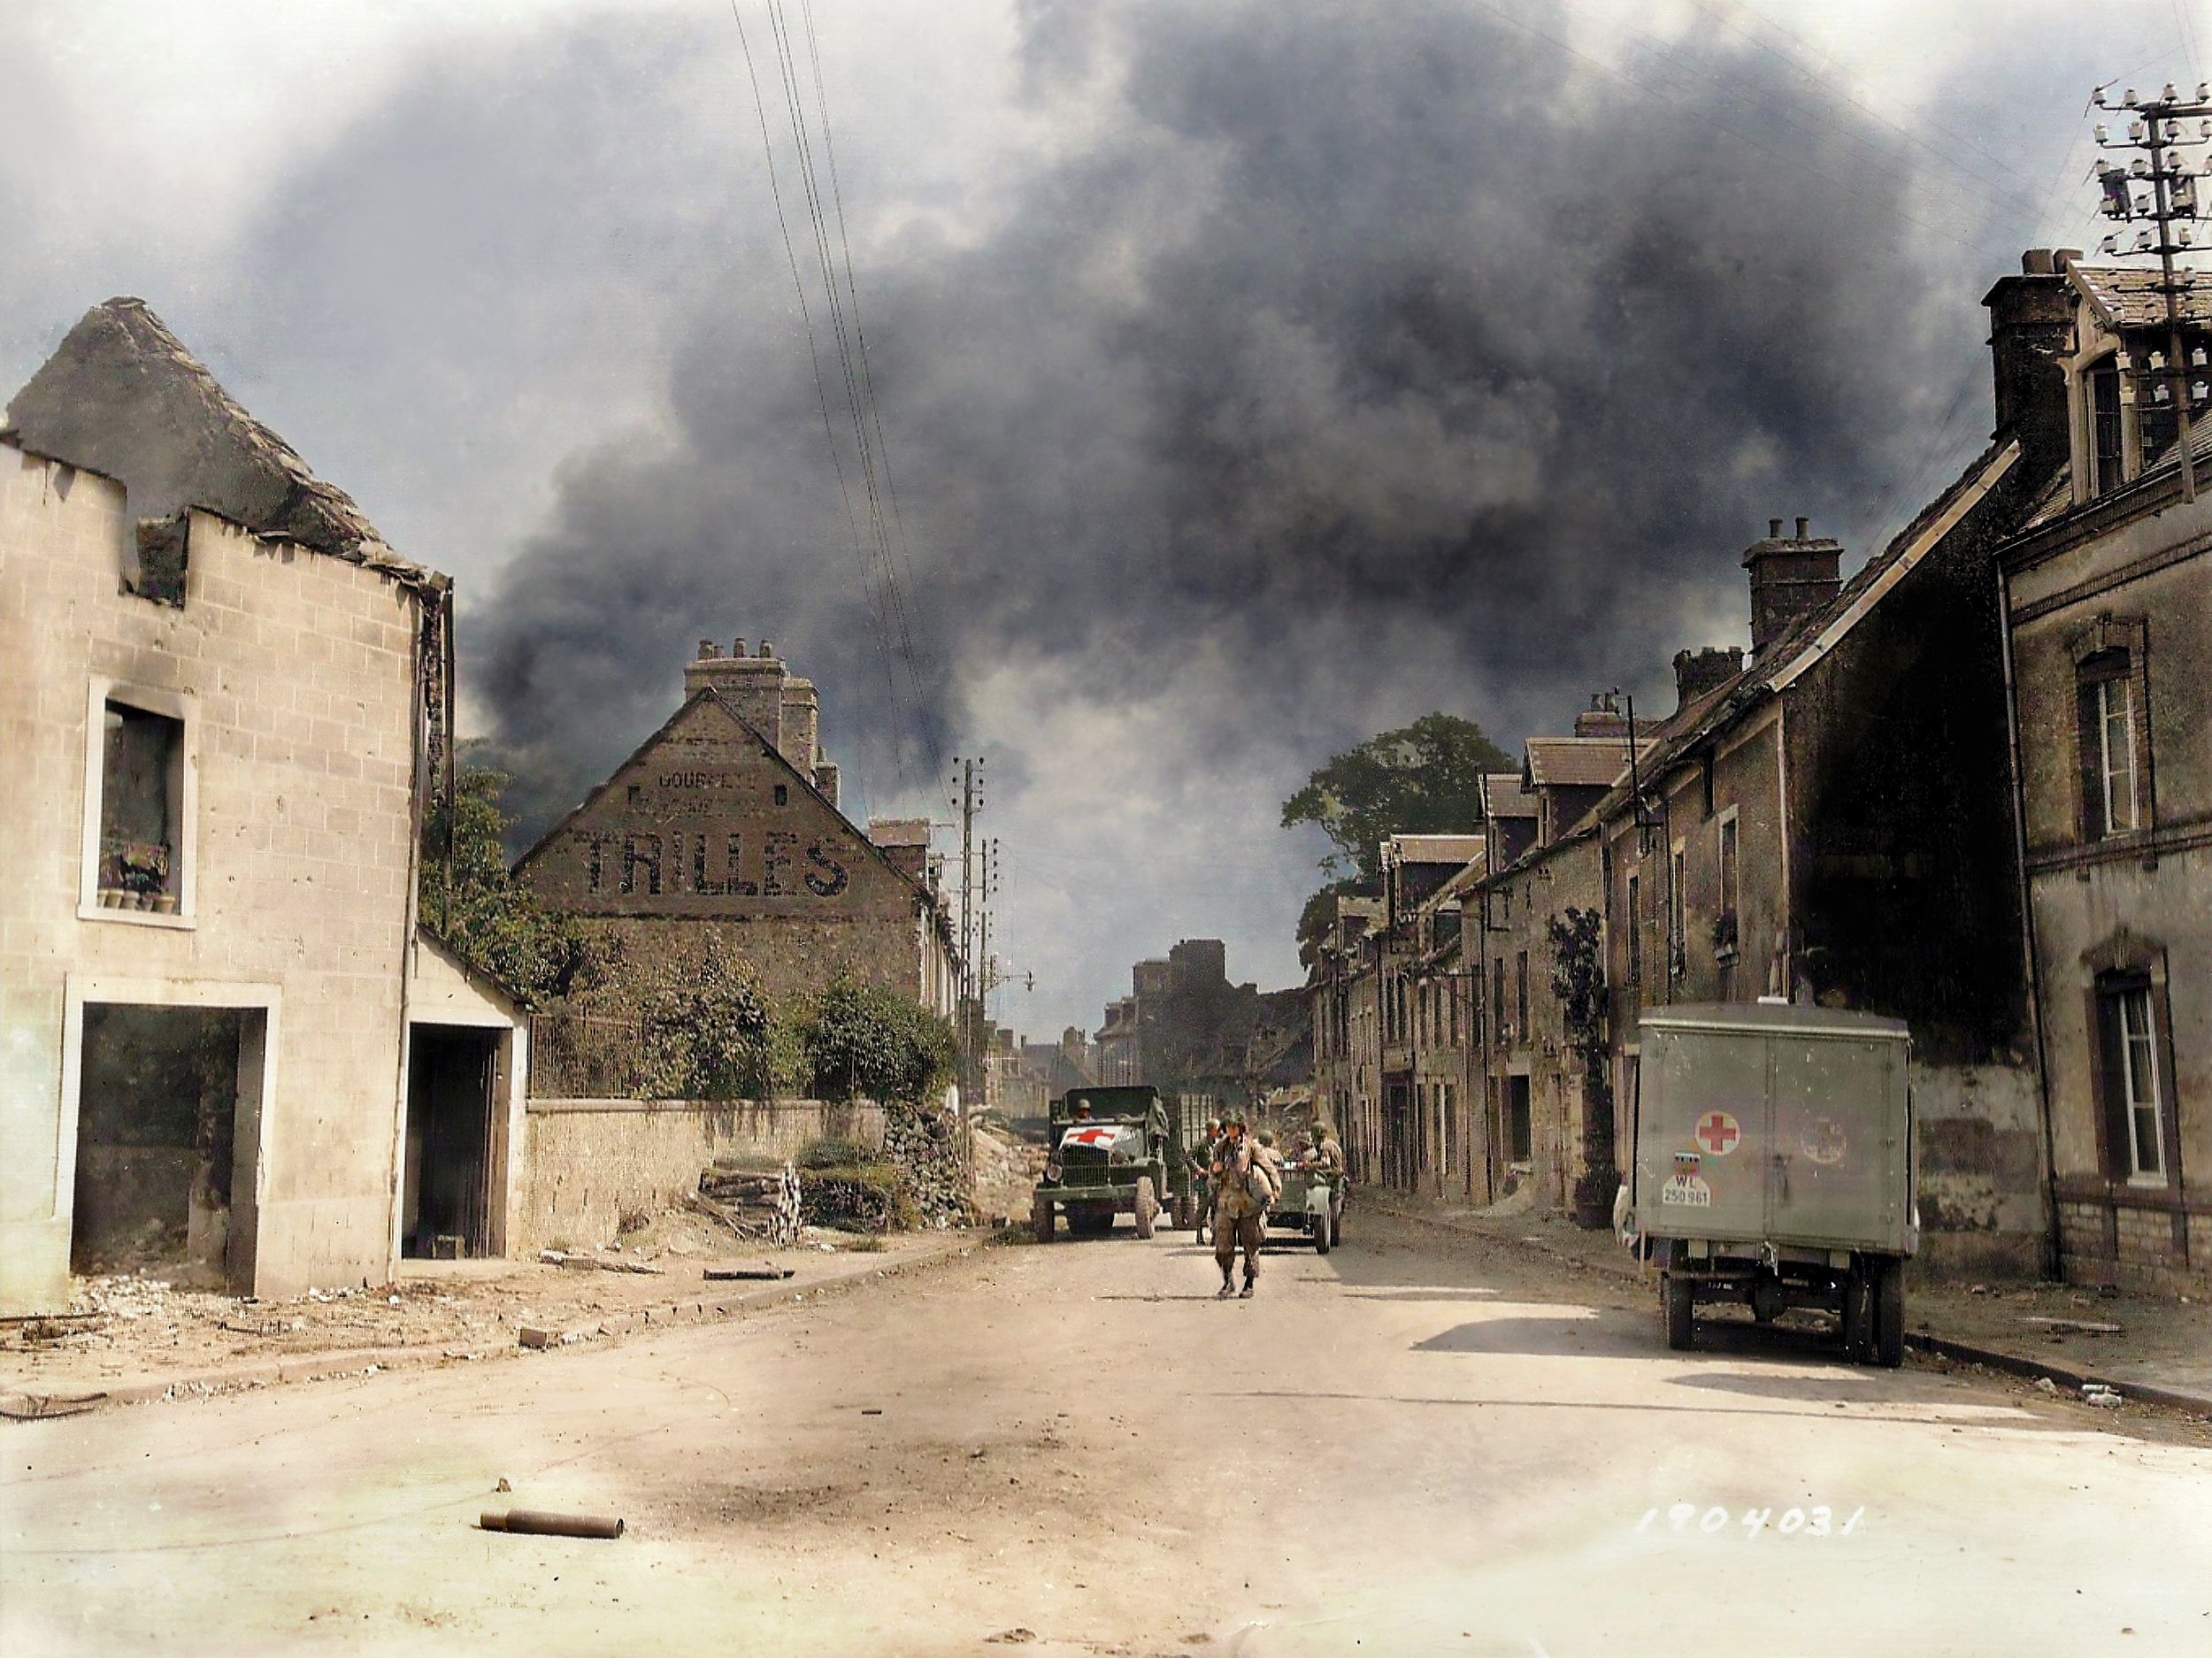 Smoke rises as paratroopers, ambulances, and a captured Kubelwagen populate a deserted street in Carentan in this colorized photo taken during the battle